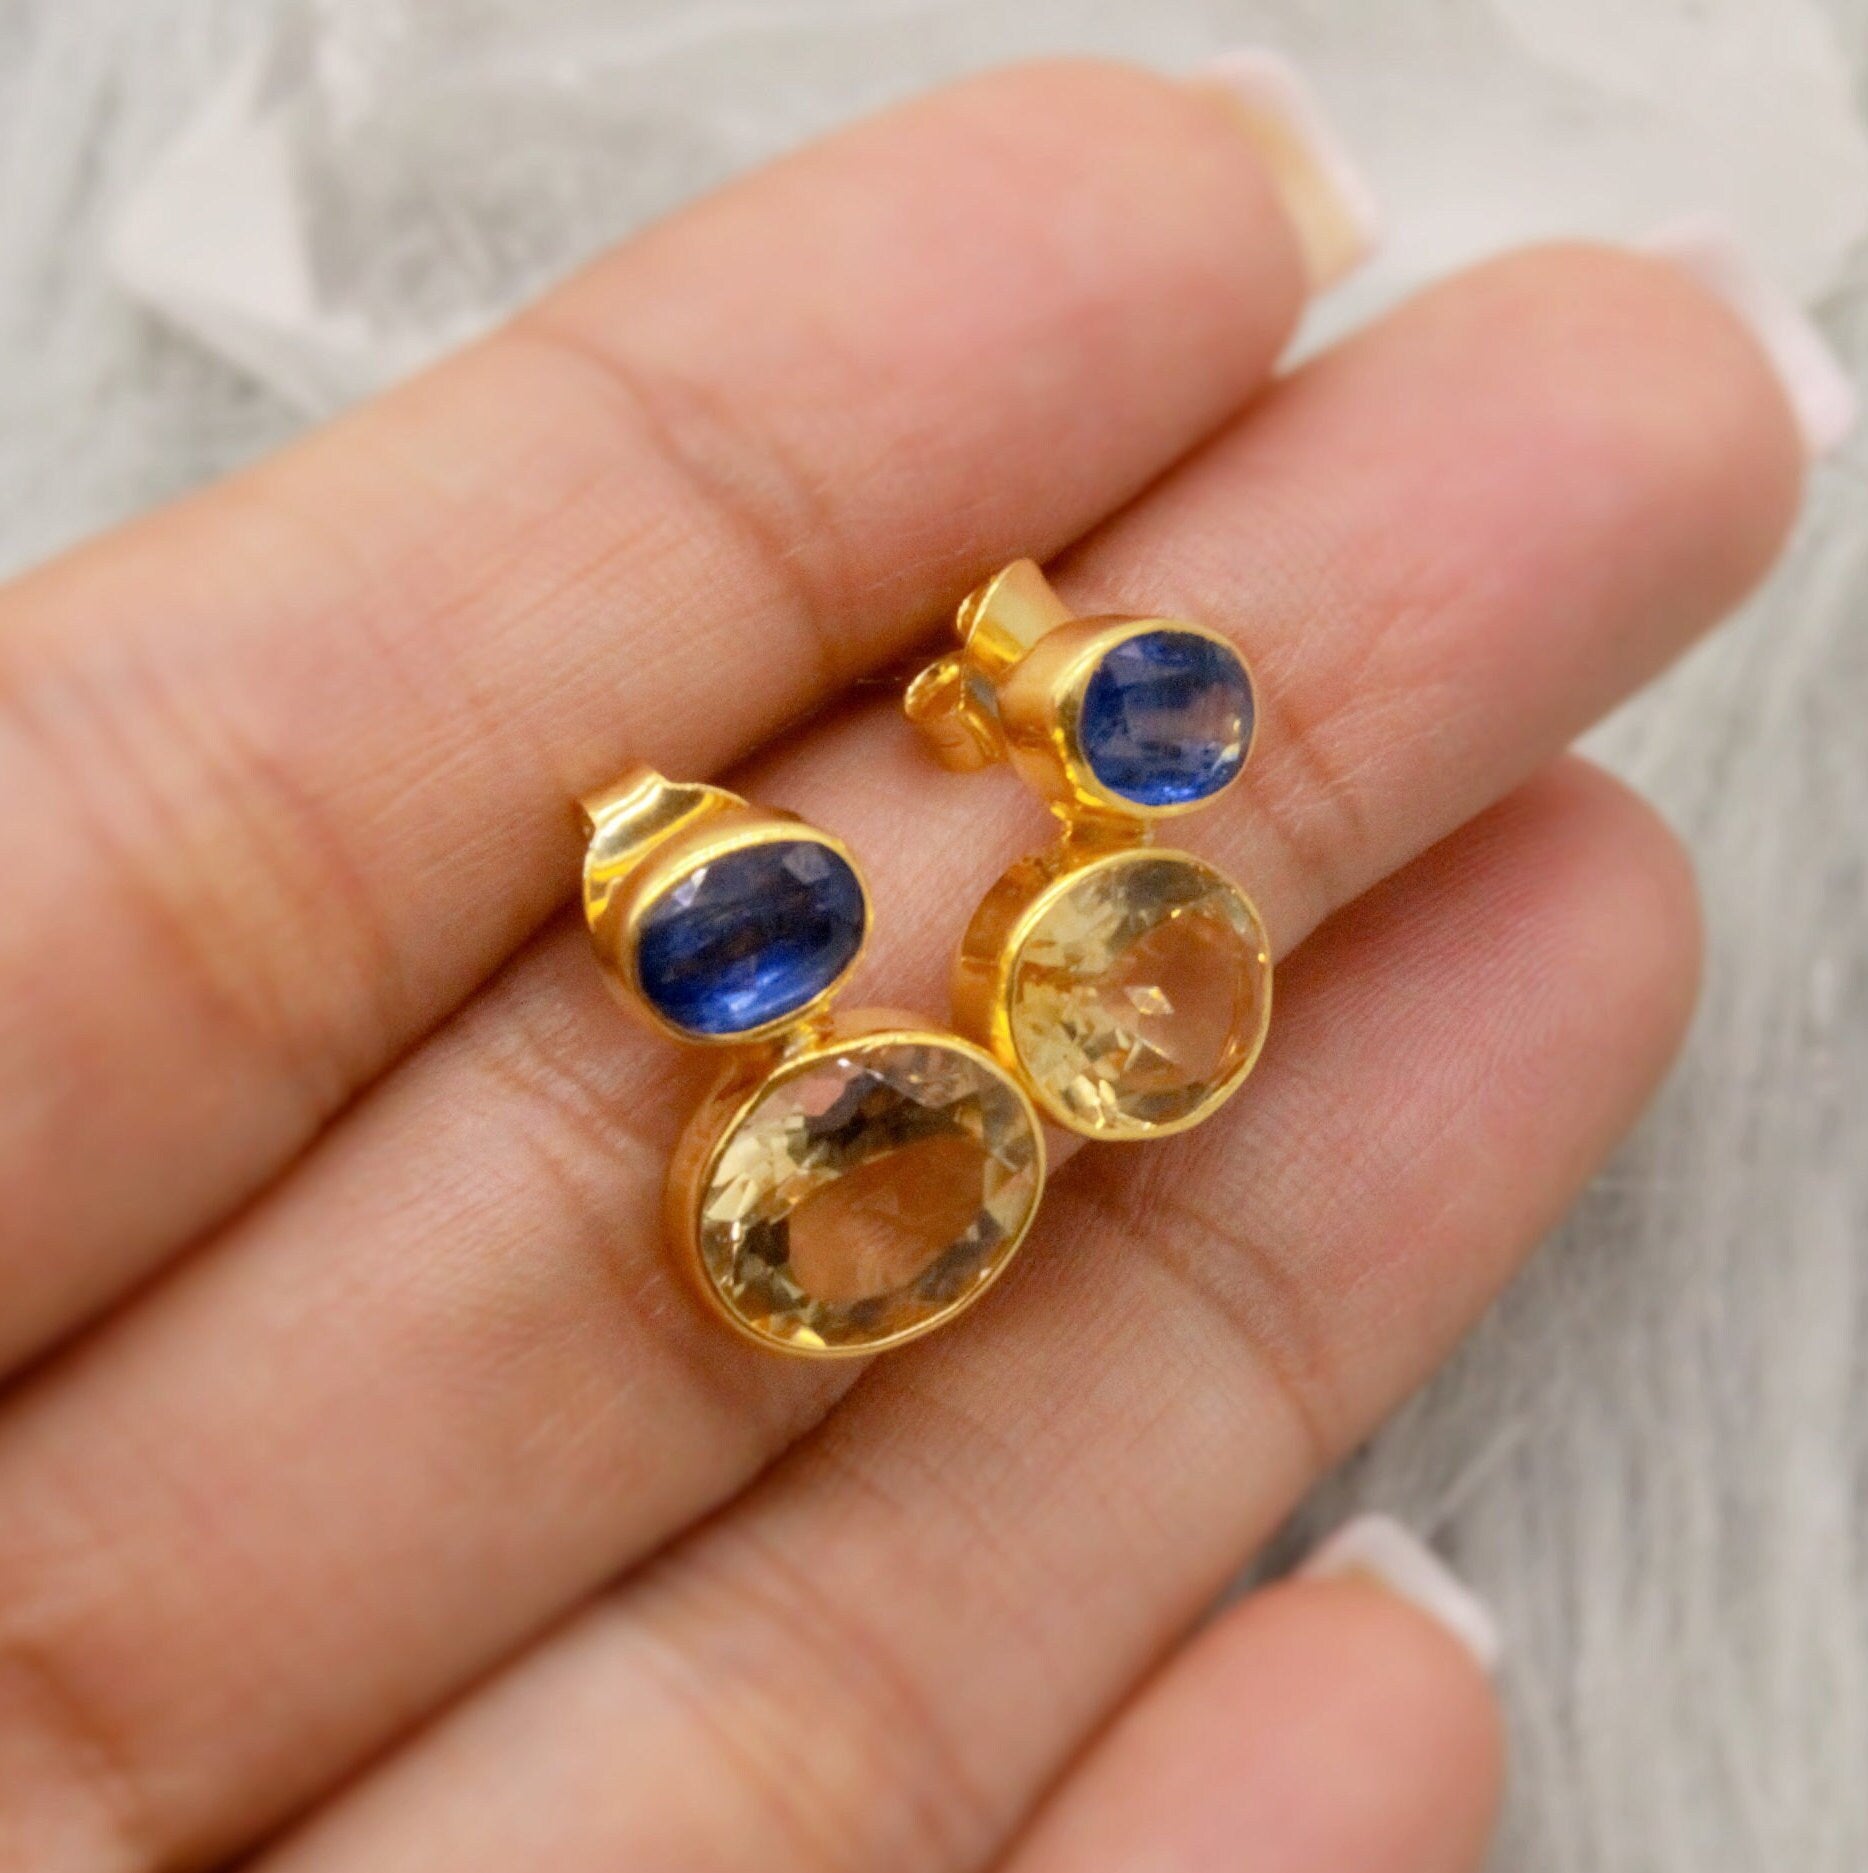 Kyanite, Citrine Gold Earrings, Gold Plated Silver Stud Earrings, Citrine Jewelry, Unique Statement Earrings, November Stone, Gift For Her